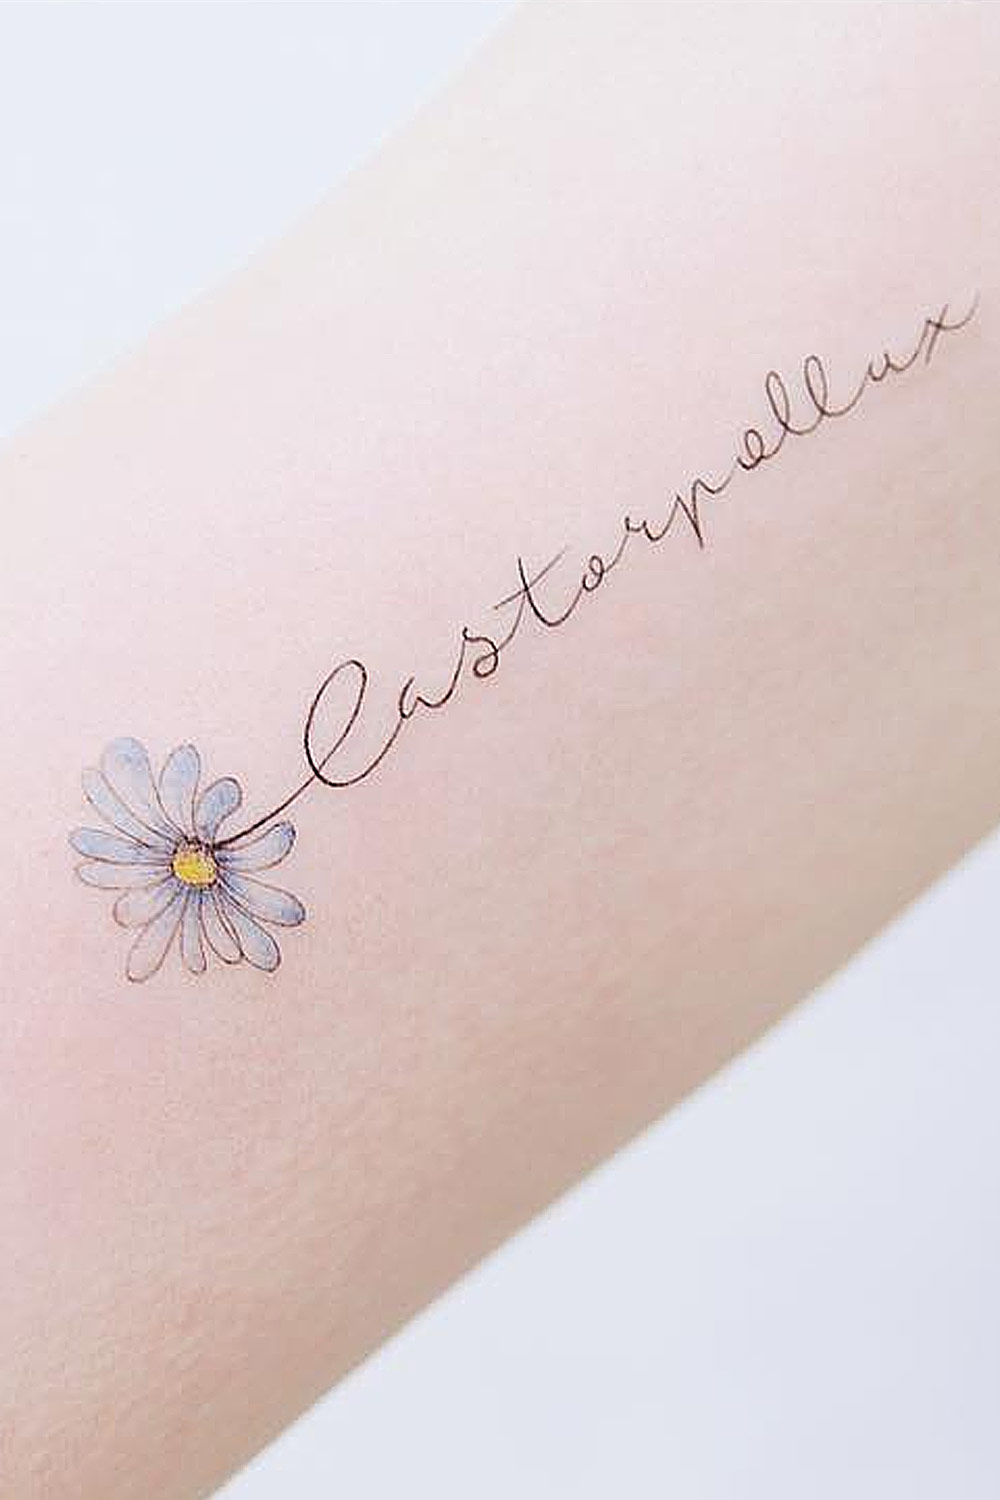 Meaningful Tattoo with a Daisy